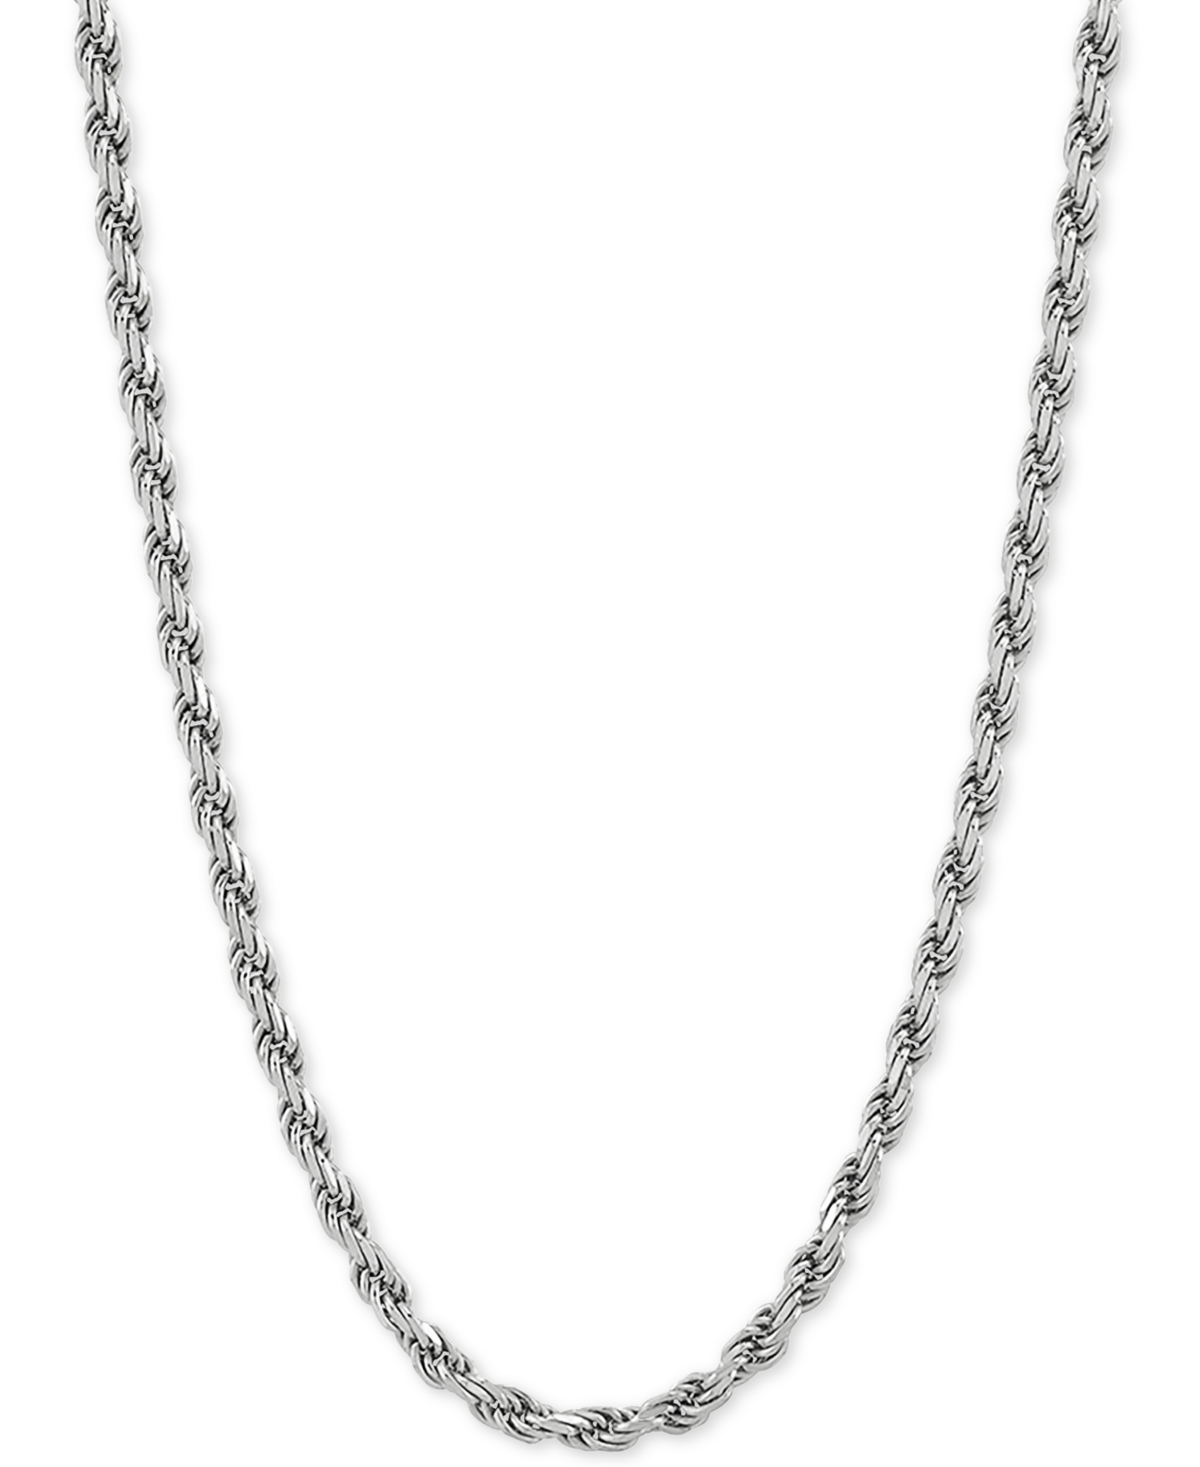 Giani Bernini Thin Rope Chain 16 Necklace (1.5mm) in 18K Gold-Plate Over Sterling Silver, Created for Macy's (also in Sterling Silver) - Gold Over Si